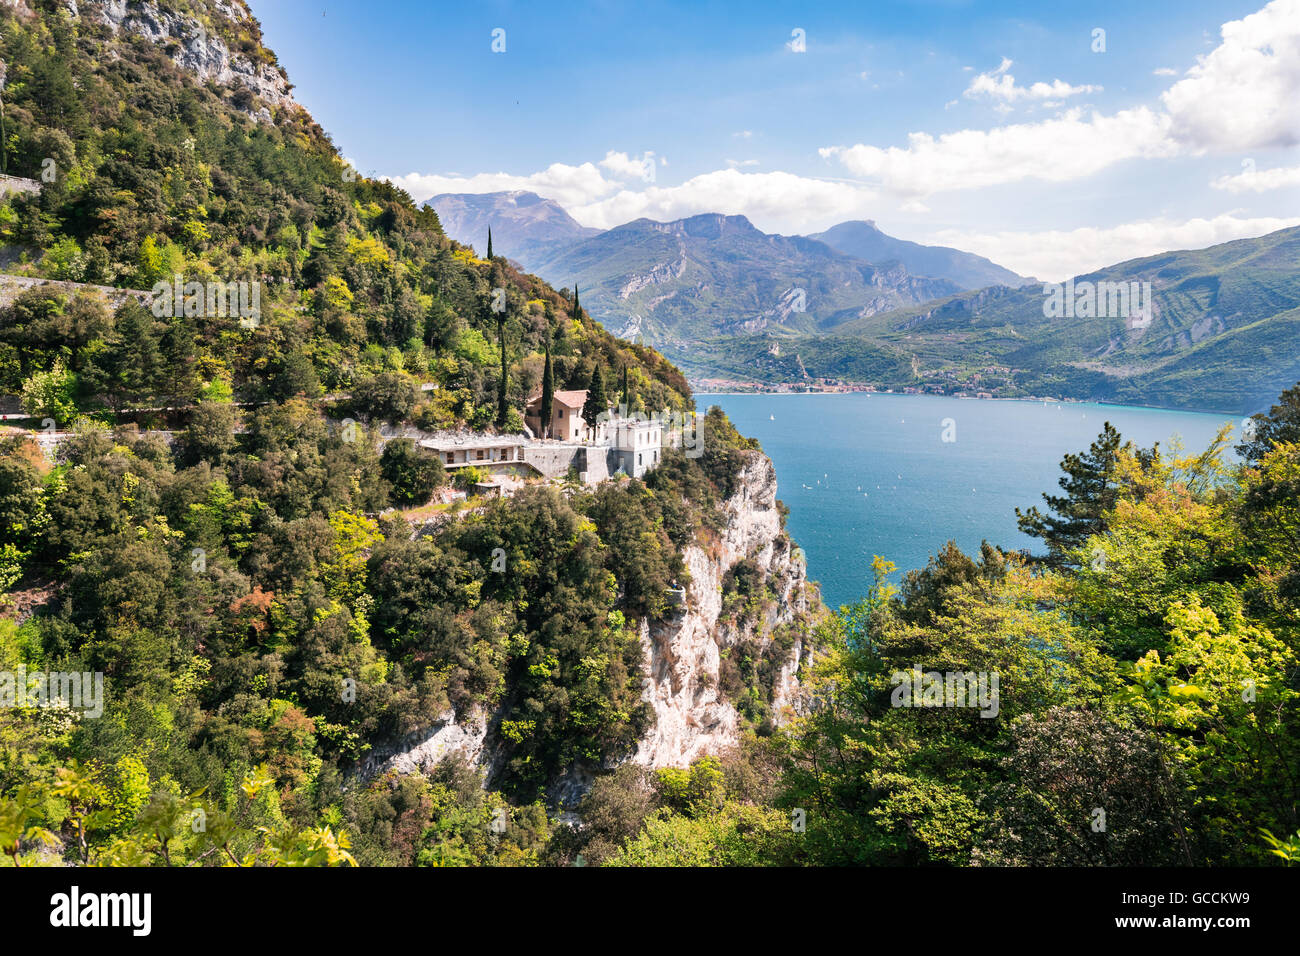 Panorama of the gorgeous Lake Garda surrounded by mountains in Riva del Garda, Italy. Stock Photo